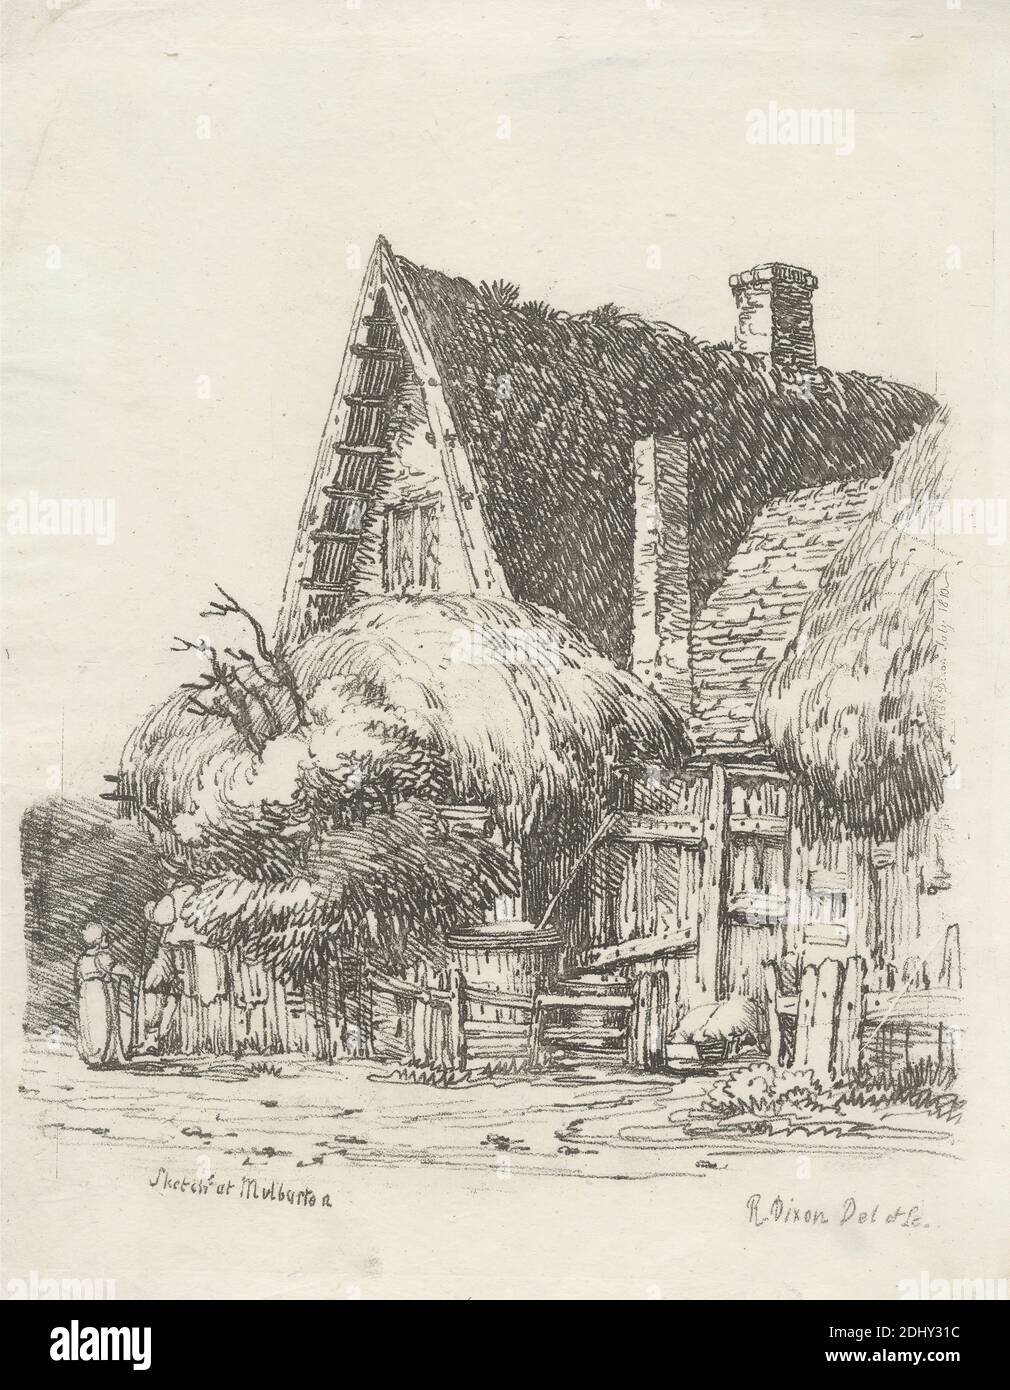 Sketch at Mulbarton, Robert Dixon, 1780–1815, British, after Robert Dixon, 1780–1815, British, Published by Robert Dixon, 1780–1815, British, between 1810 and 1811, Soft-ground etching on medium, slightly textured, cream wove paper, Sheet: 10 5/8 x 8 3/16 inches (27 x 20.8 cm), Plate: 9 15/16 x 7 7/8 inches (25.2 x 20 cm), and Image: 7 1/2 x 7 1/2 inches (19 x 19 cm), architectural subject, chimneys, cottage, fences, gates, genre subject, house, illustration, peasant, road, street, thatch, trees, village, walking, woman, England, Europe, Mulbarton, Norfolk, United Kingdom Stock Photo